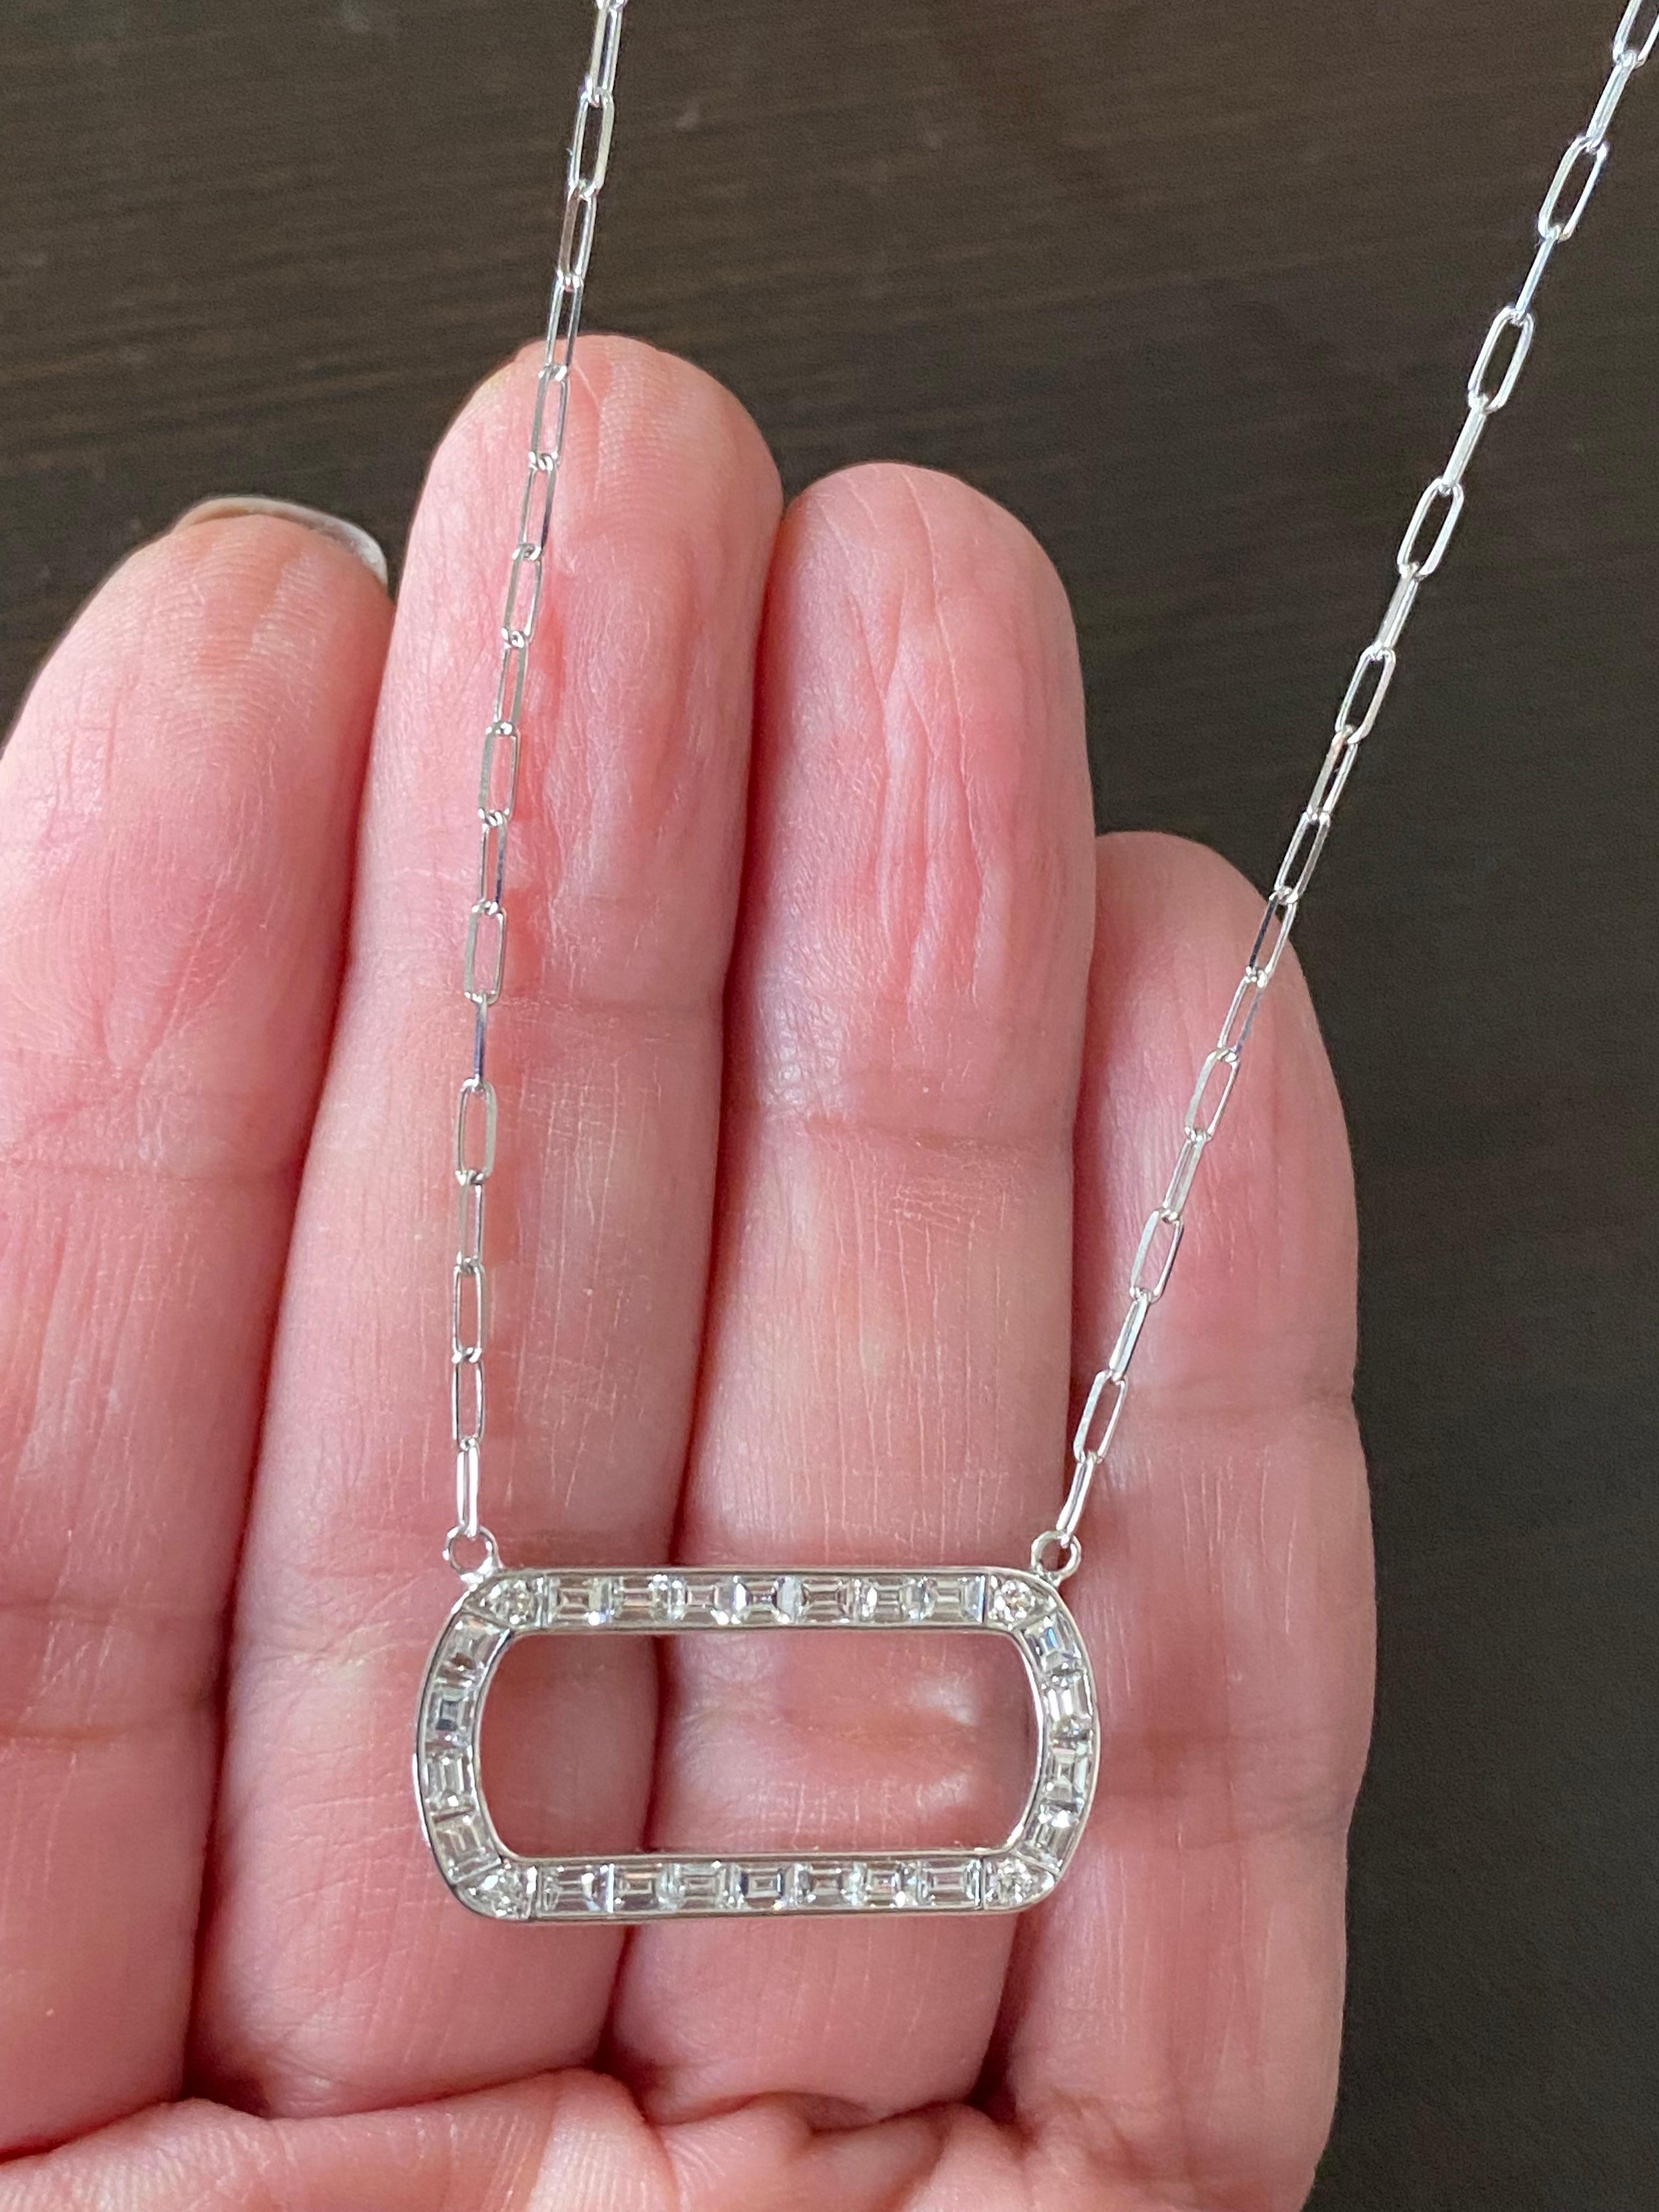 Horizontal diamond pendant set with baguette stones. 4 Round diamonds are set in each corner. The pendant is also made in a vertical style. The pendant is set in 18K white gold. The color of the stones are F, the clarity is VS1-VS2. The carat weight